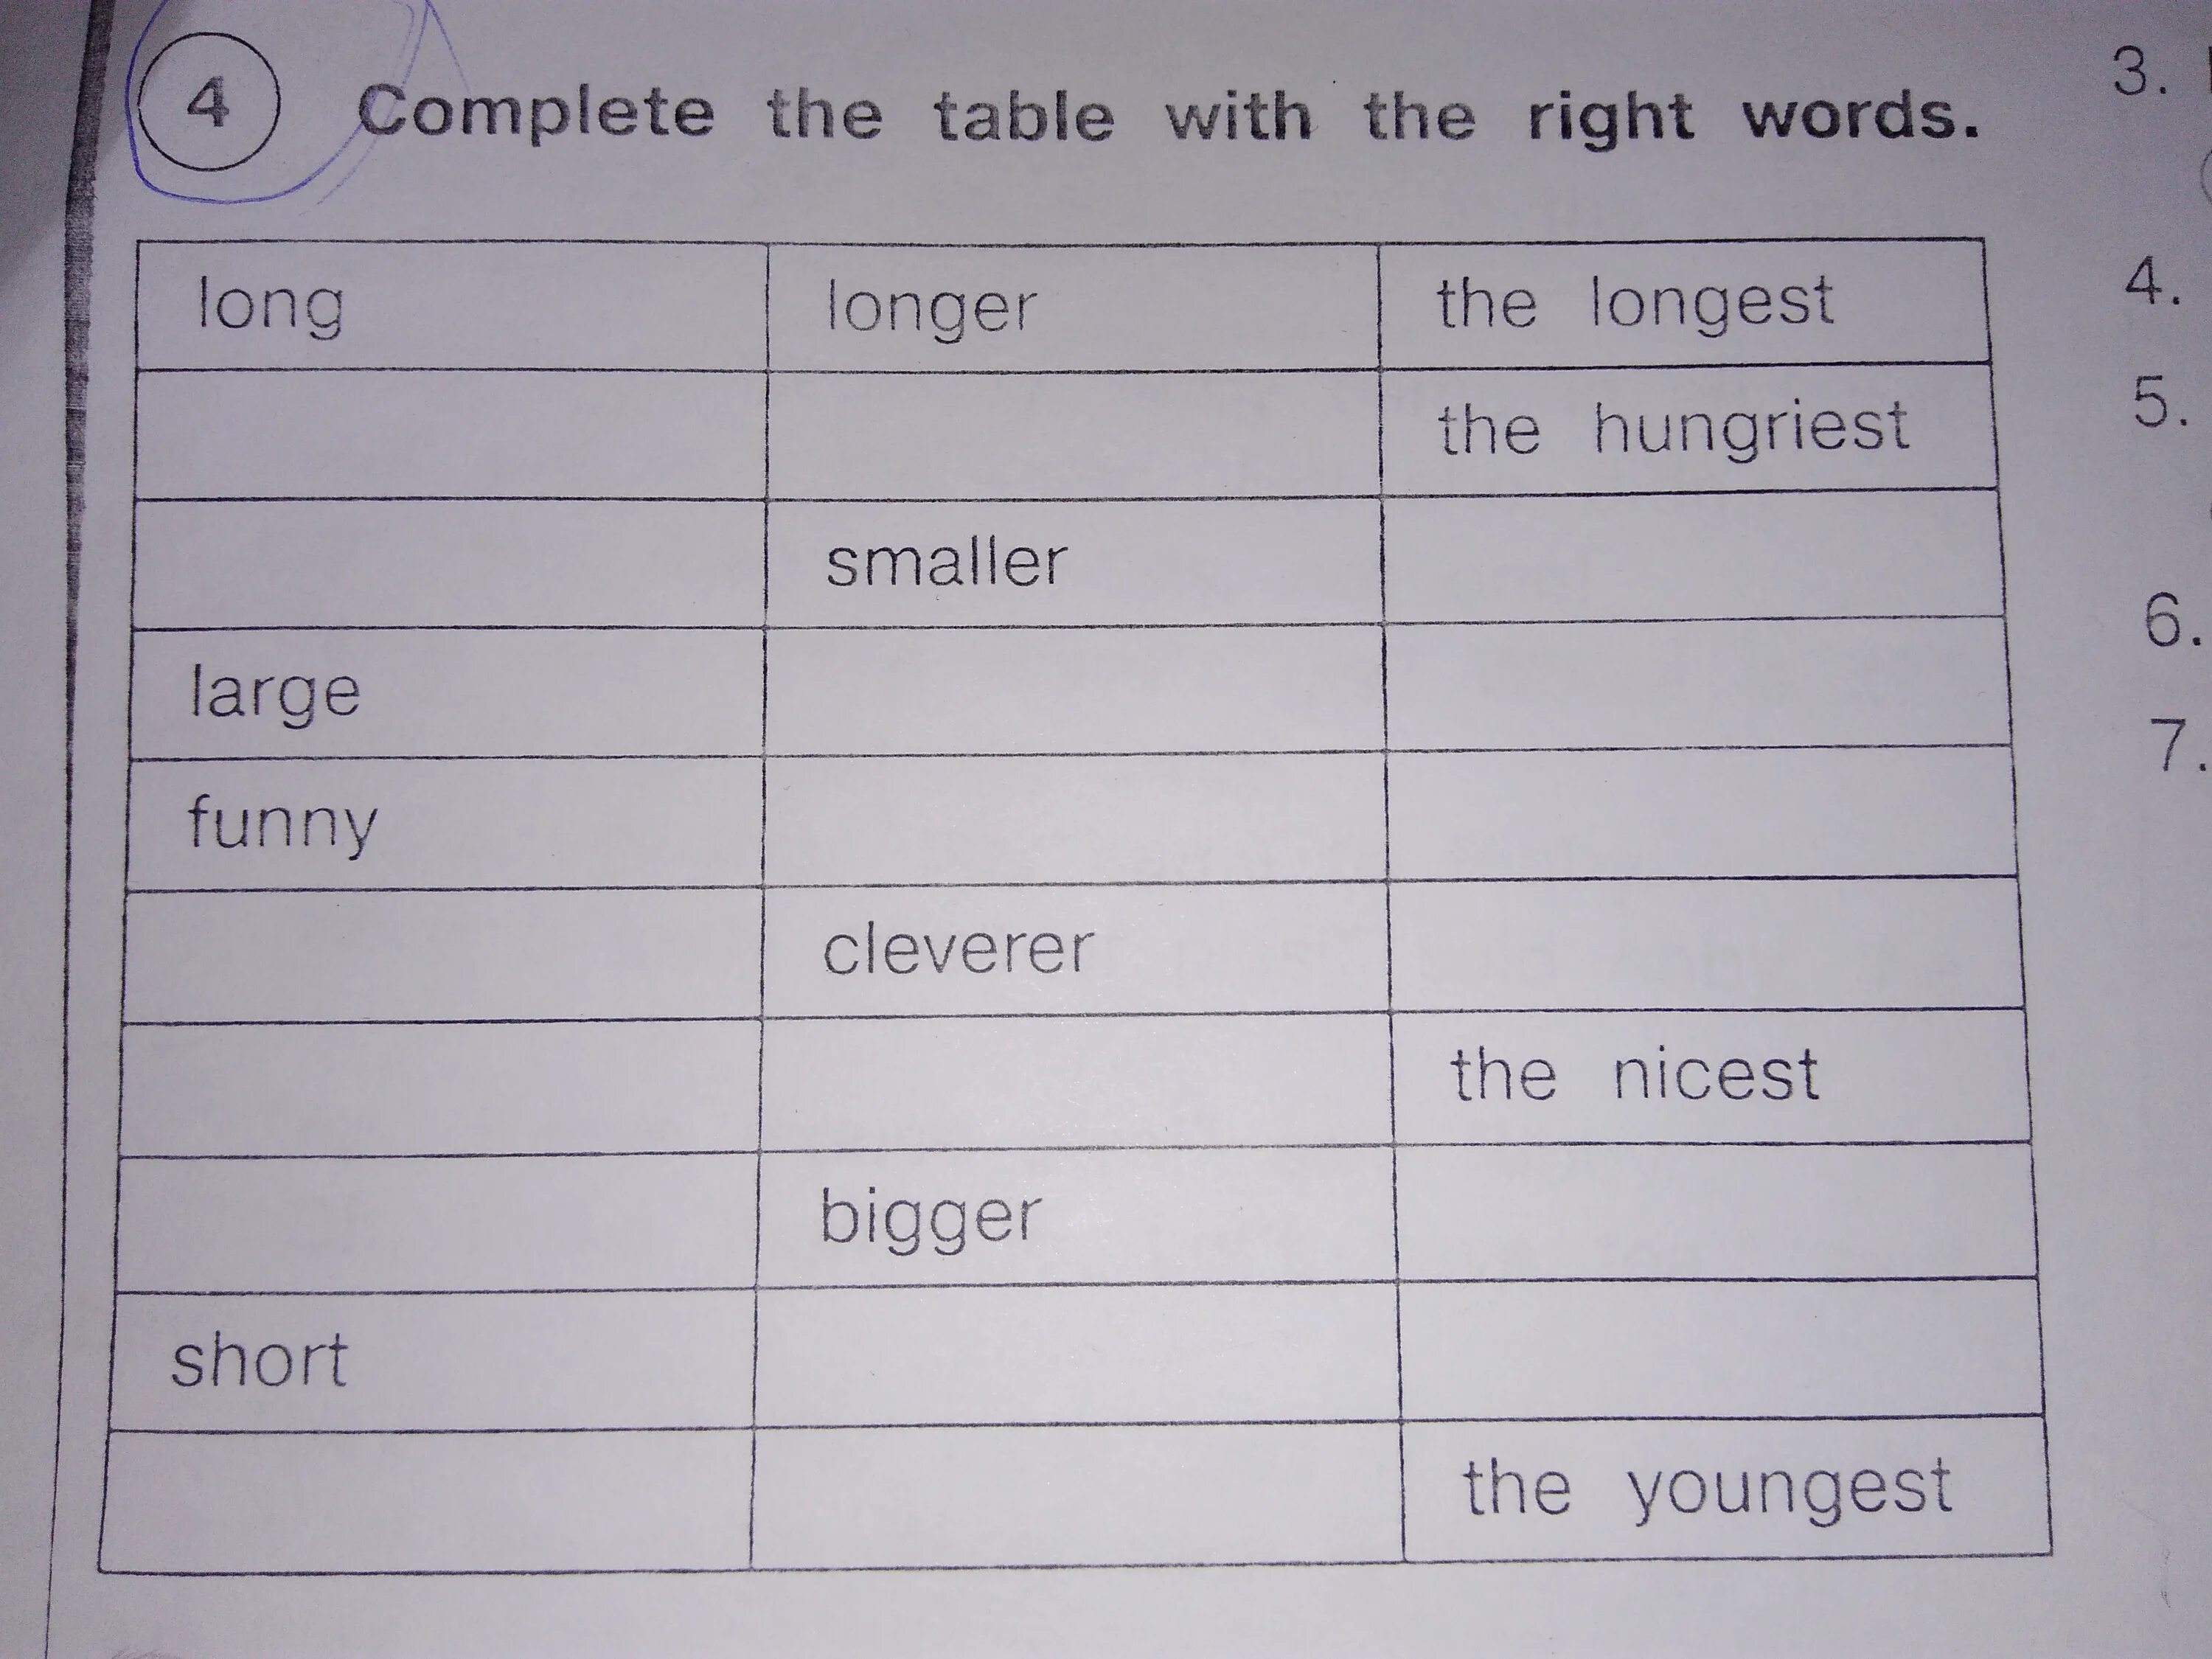 Английский язык complete the Table. Complete the Table таблица. Complete the Table таблица ответы. Complete the Table грамматика. Completed the table with the correct